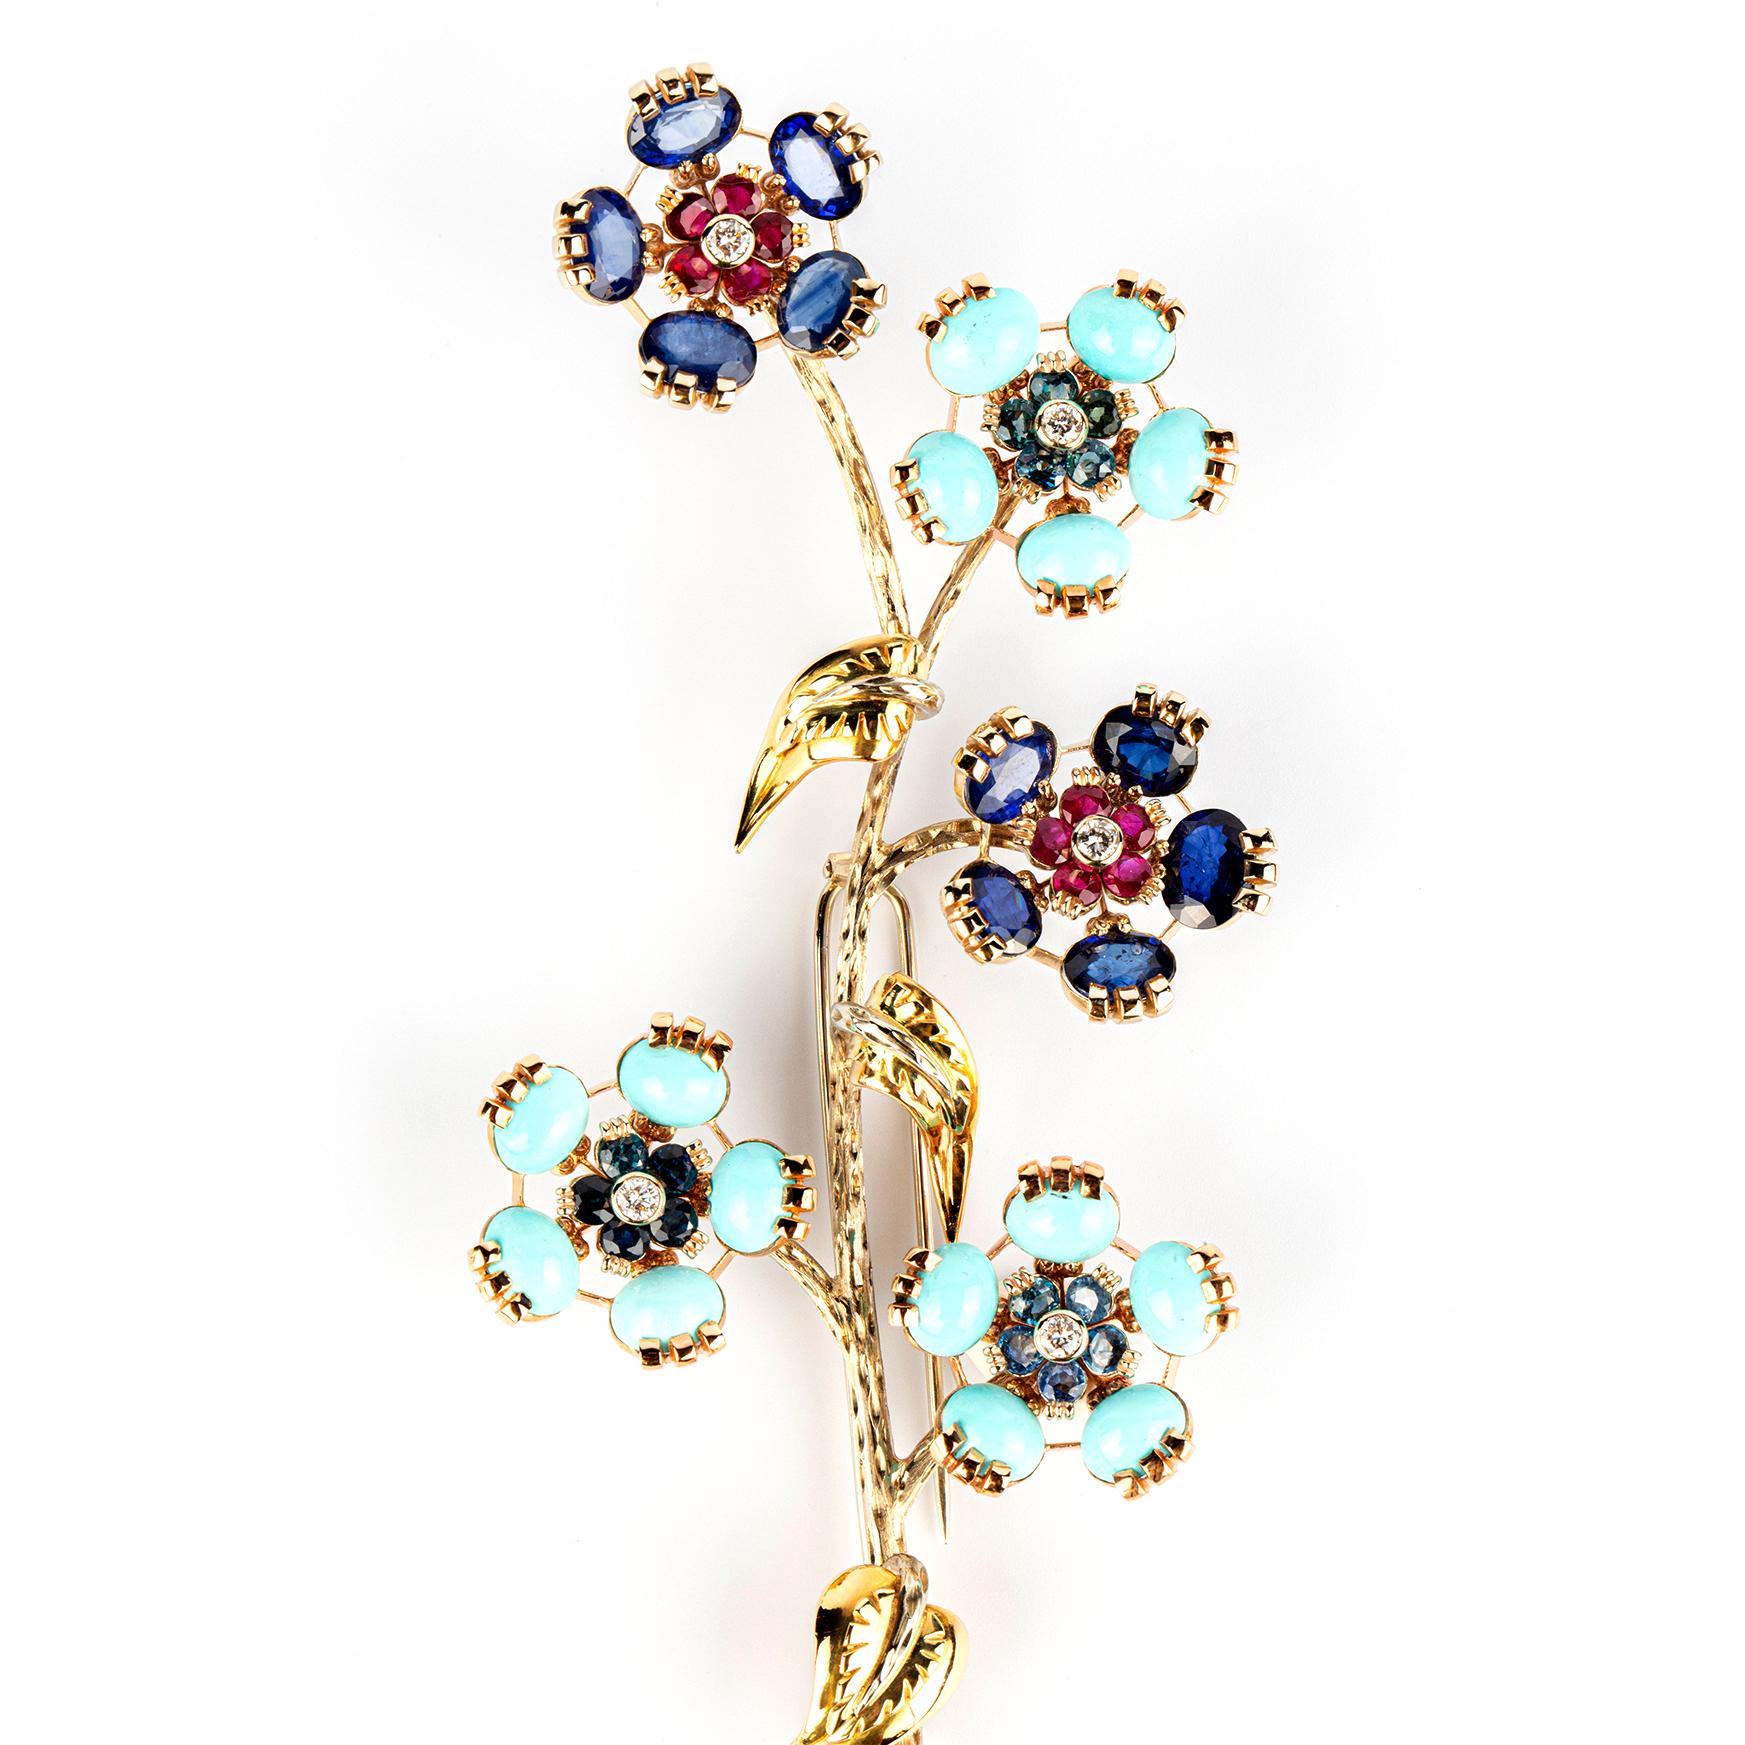 ‘En Tremblant’ brooch in yellow gold with rubies, sapphires, and turquoise by Grassi. Made in Italy, circa 1960.